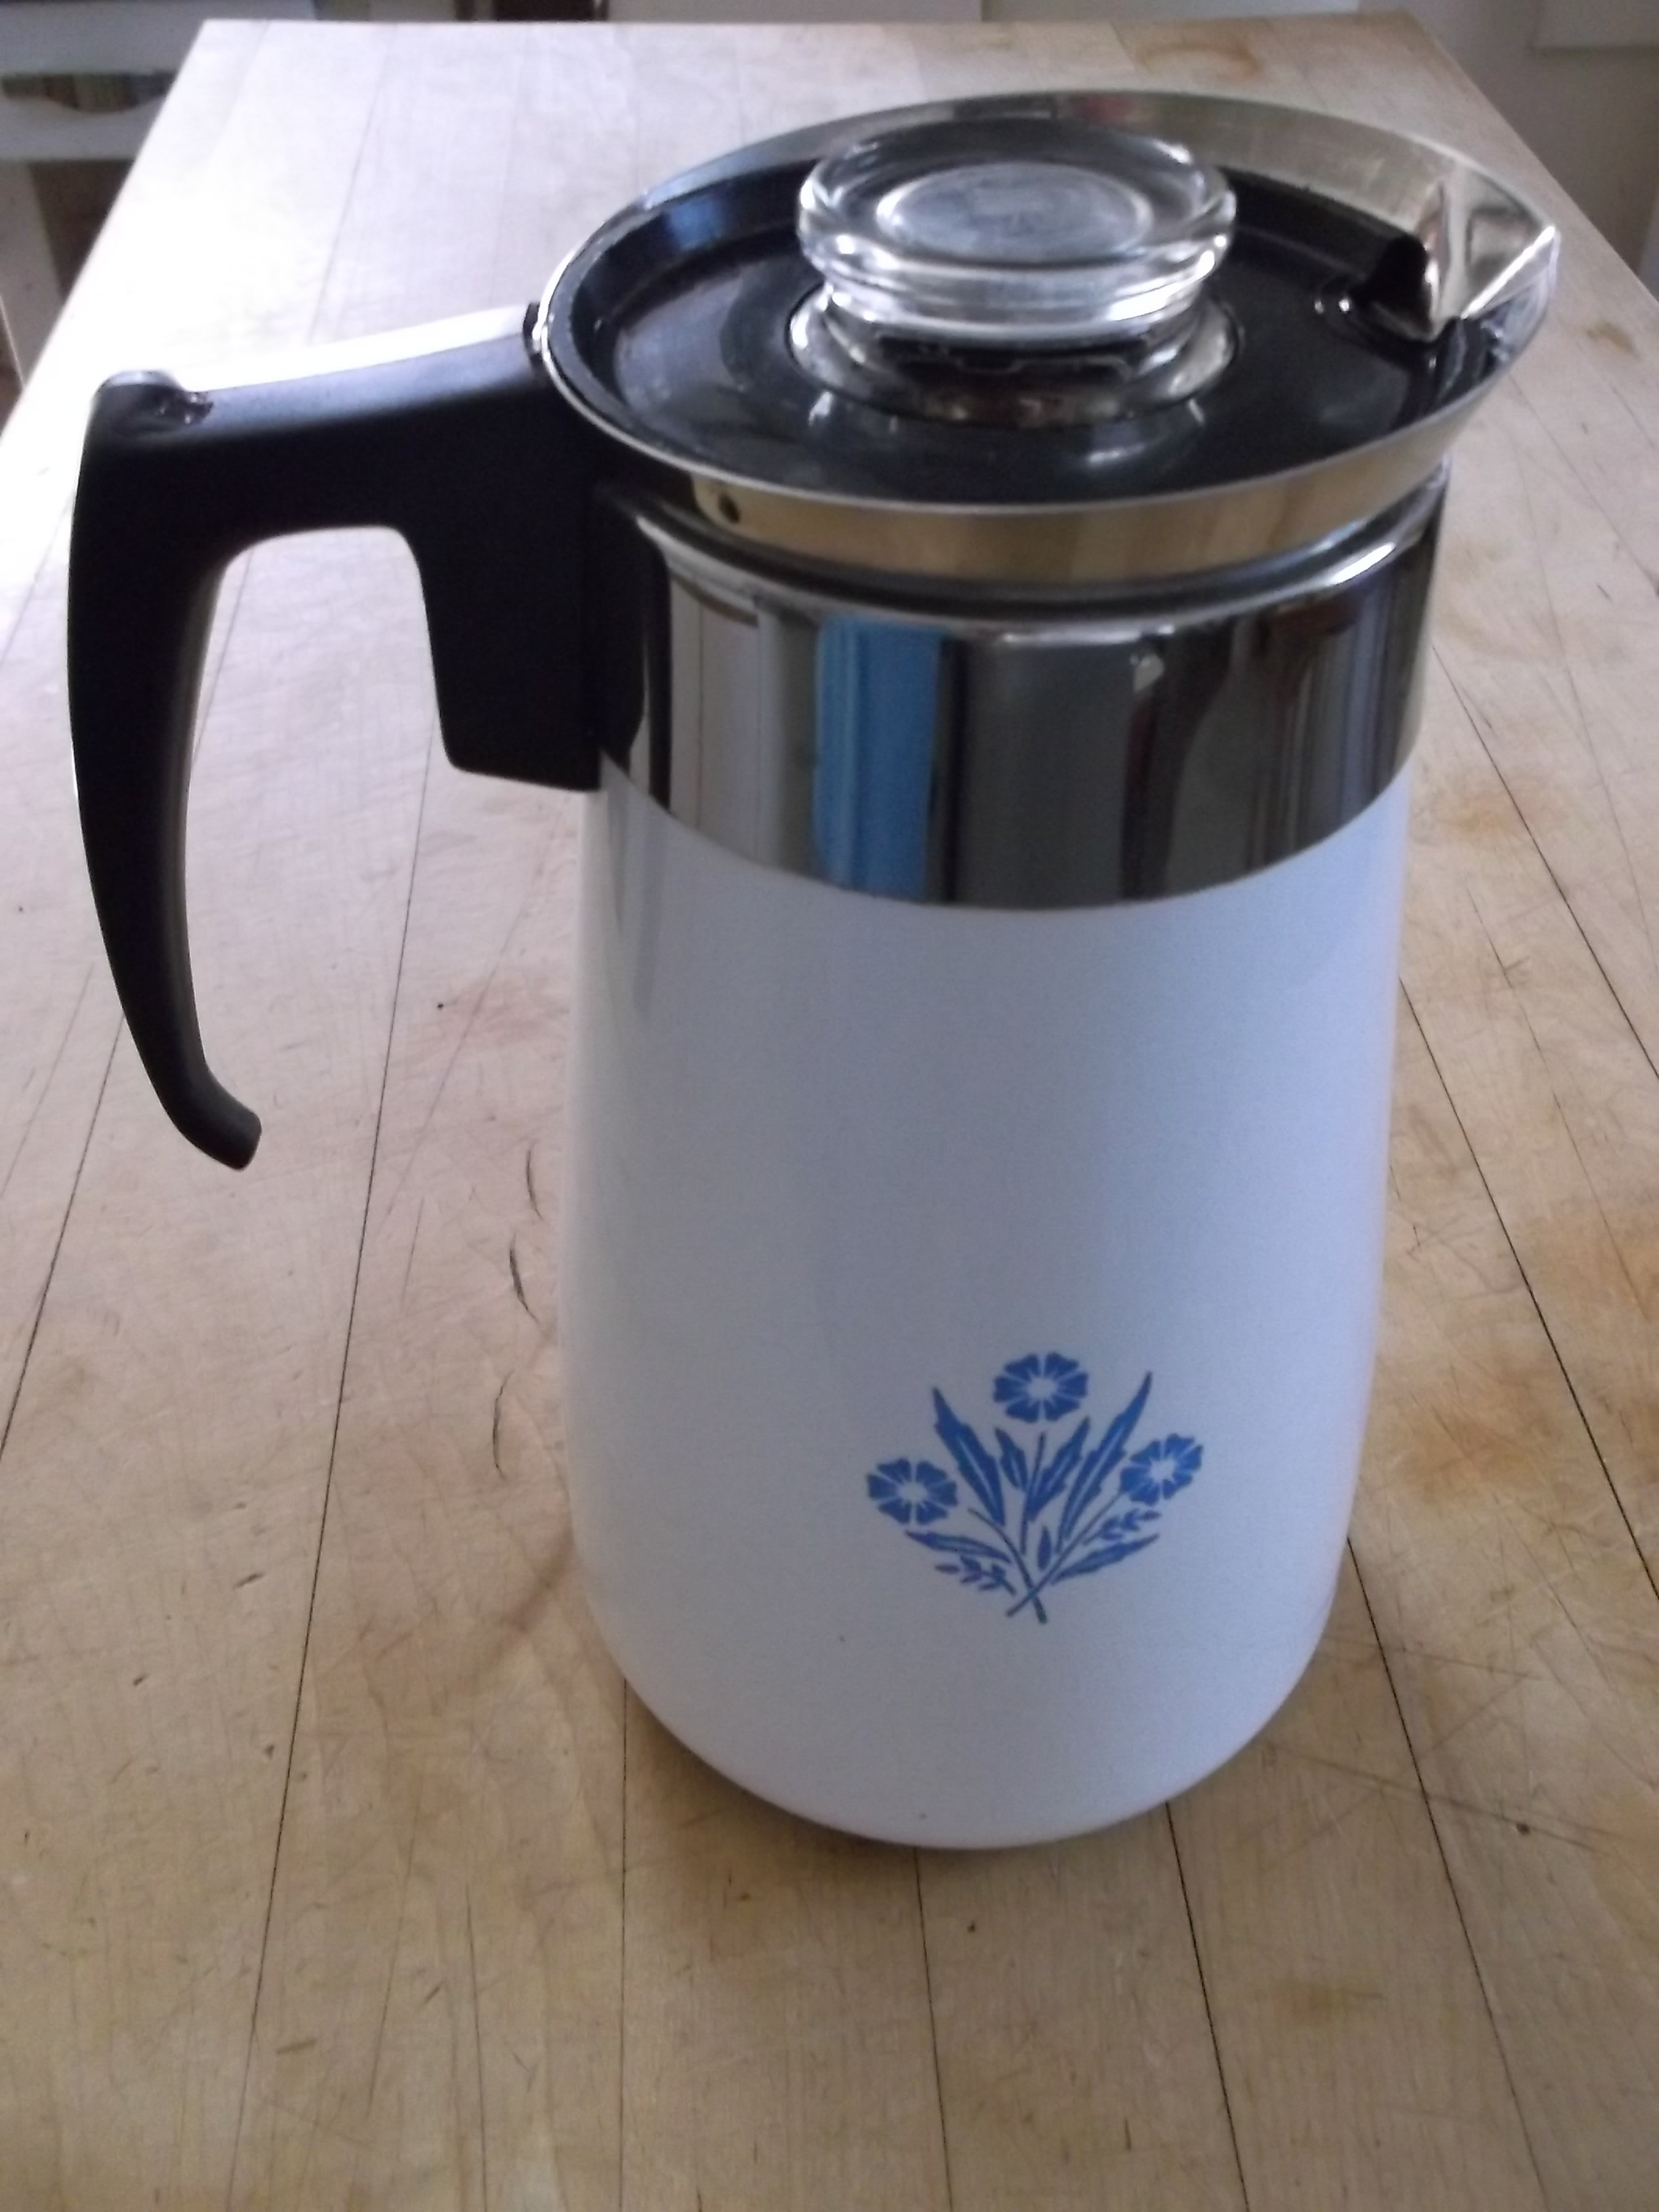 Corning ware coffee pot review 